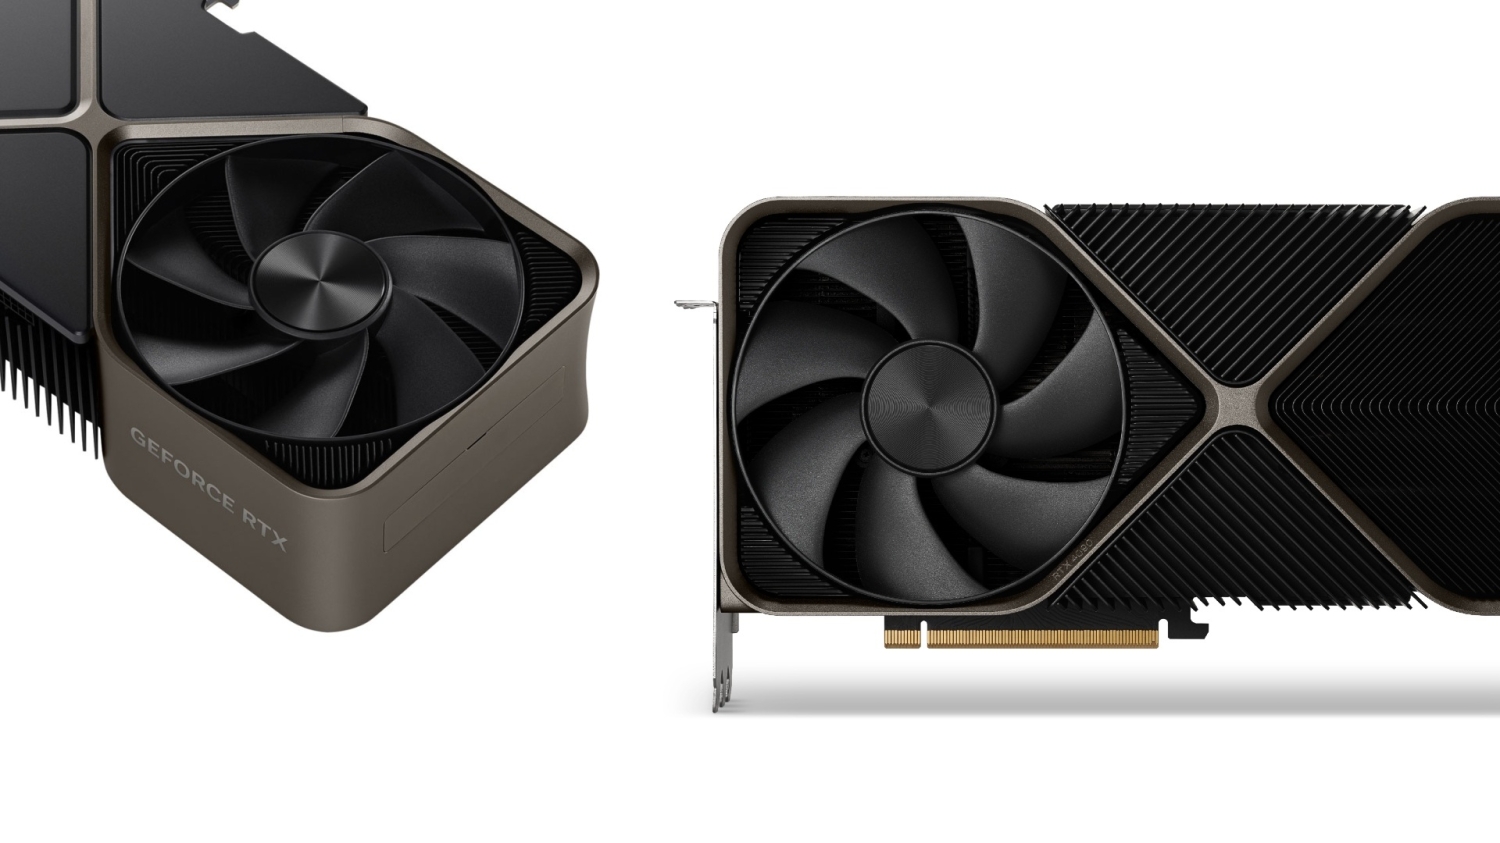 TweakTown Enlarged Image - The GeForce RTX 5090 is rumored to be 1.7X more powerful than the GeForce RTX 4090.